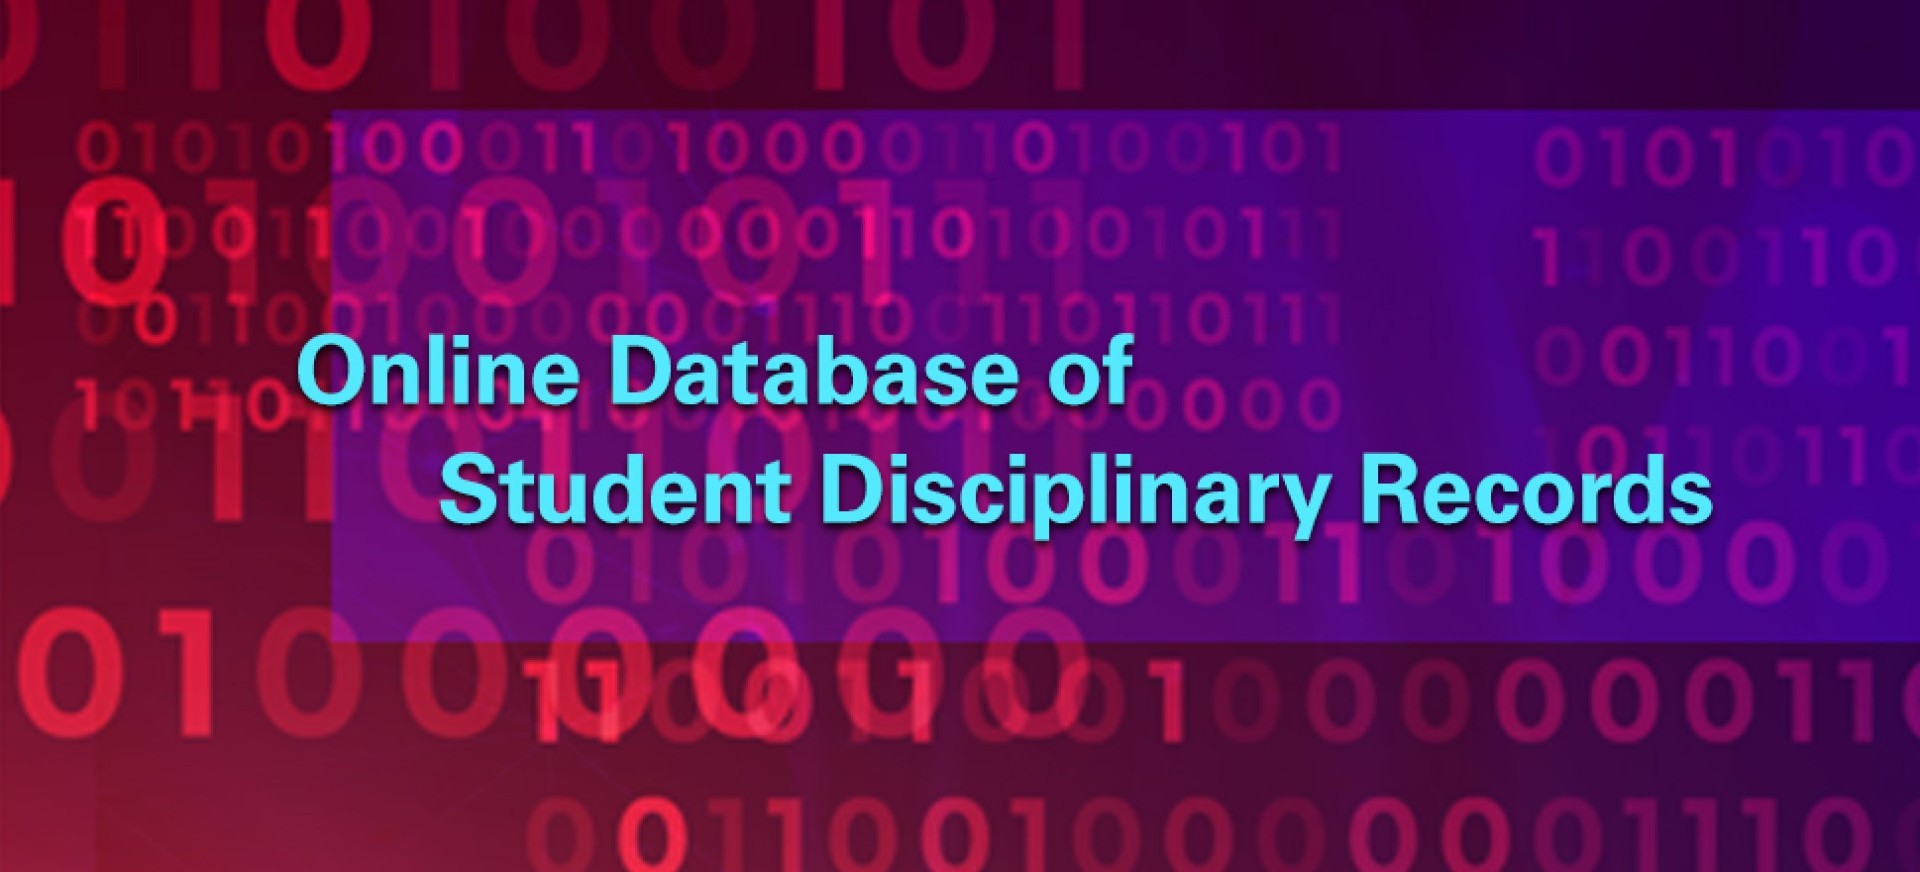 Online Database of Student Disciplinary Records